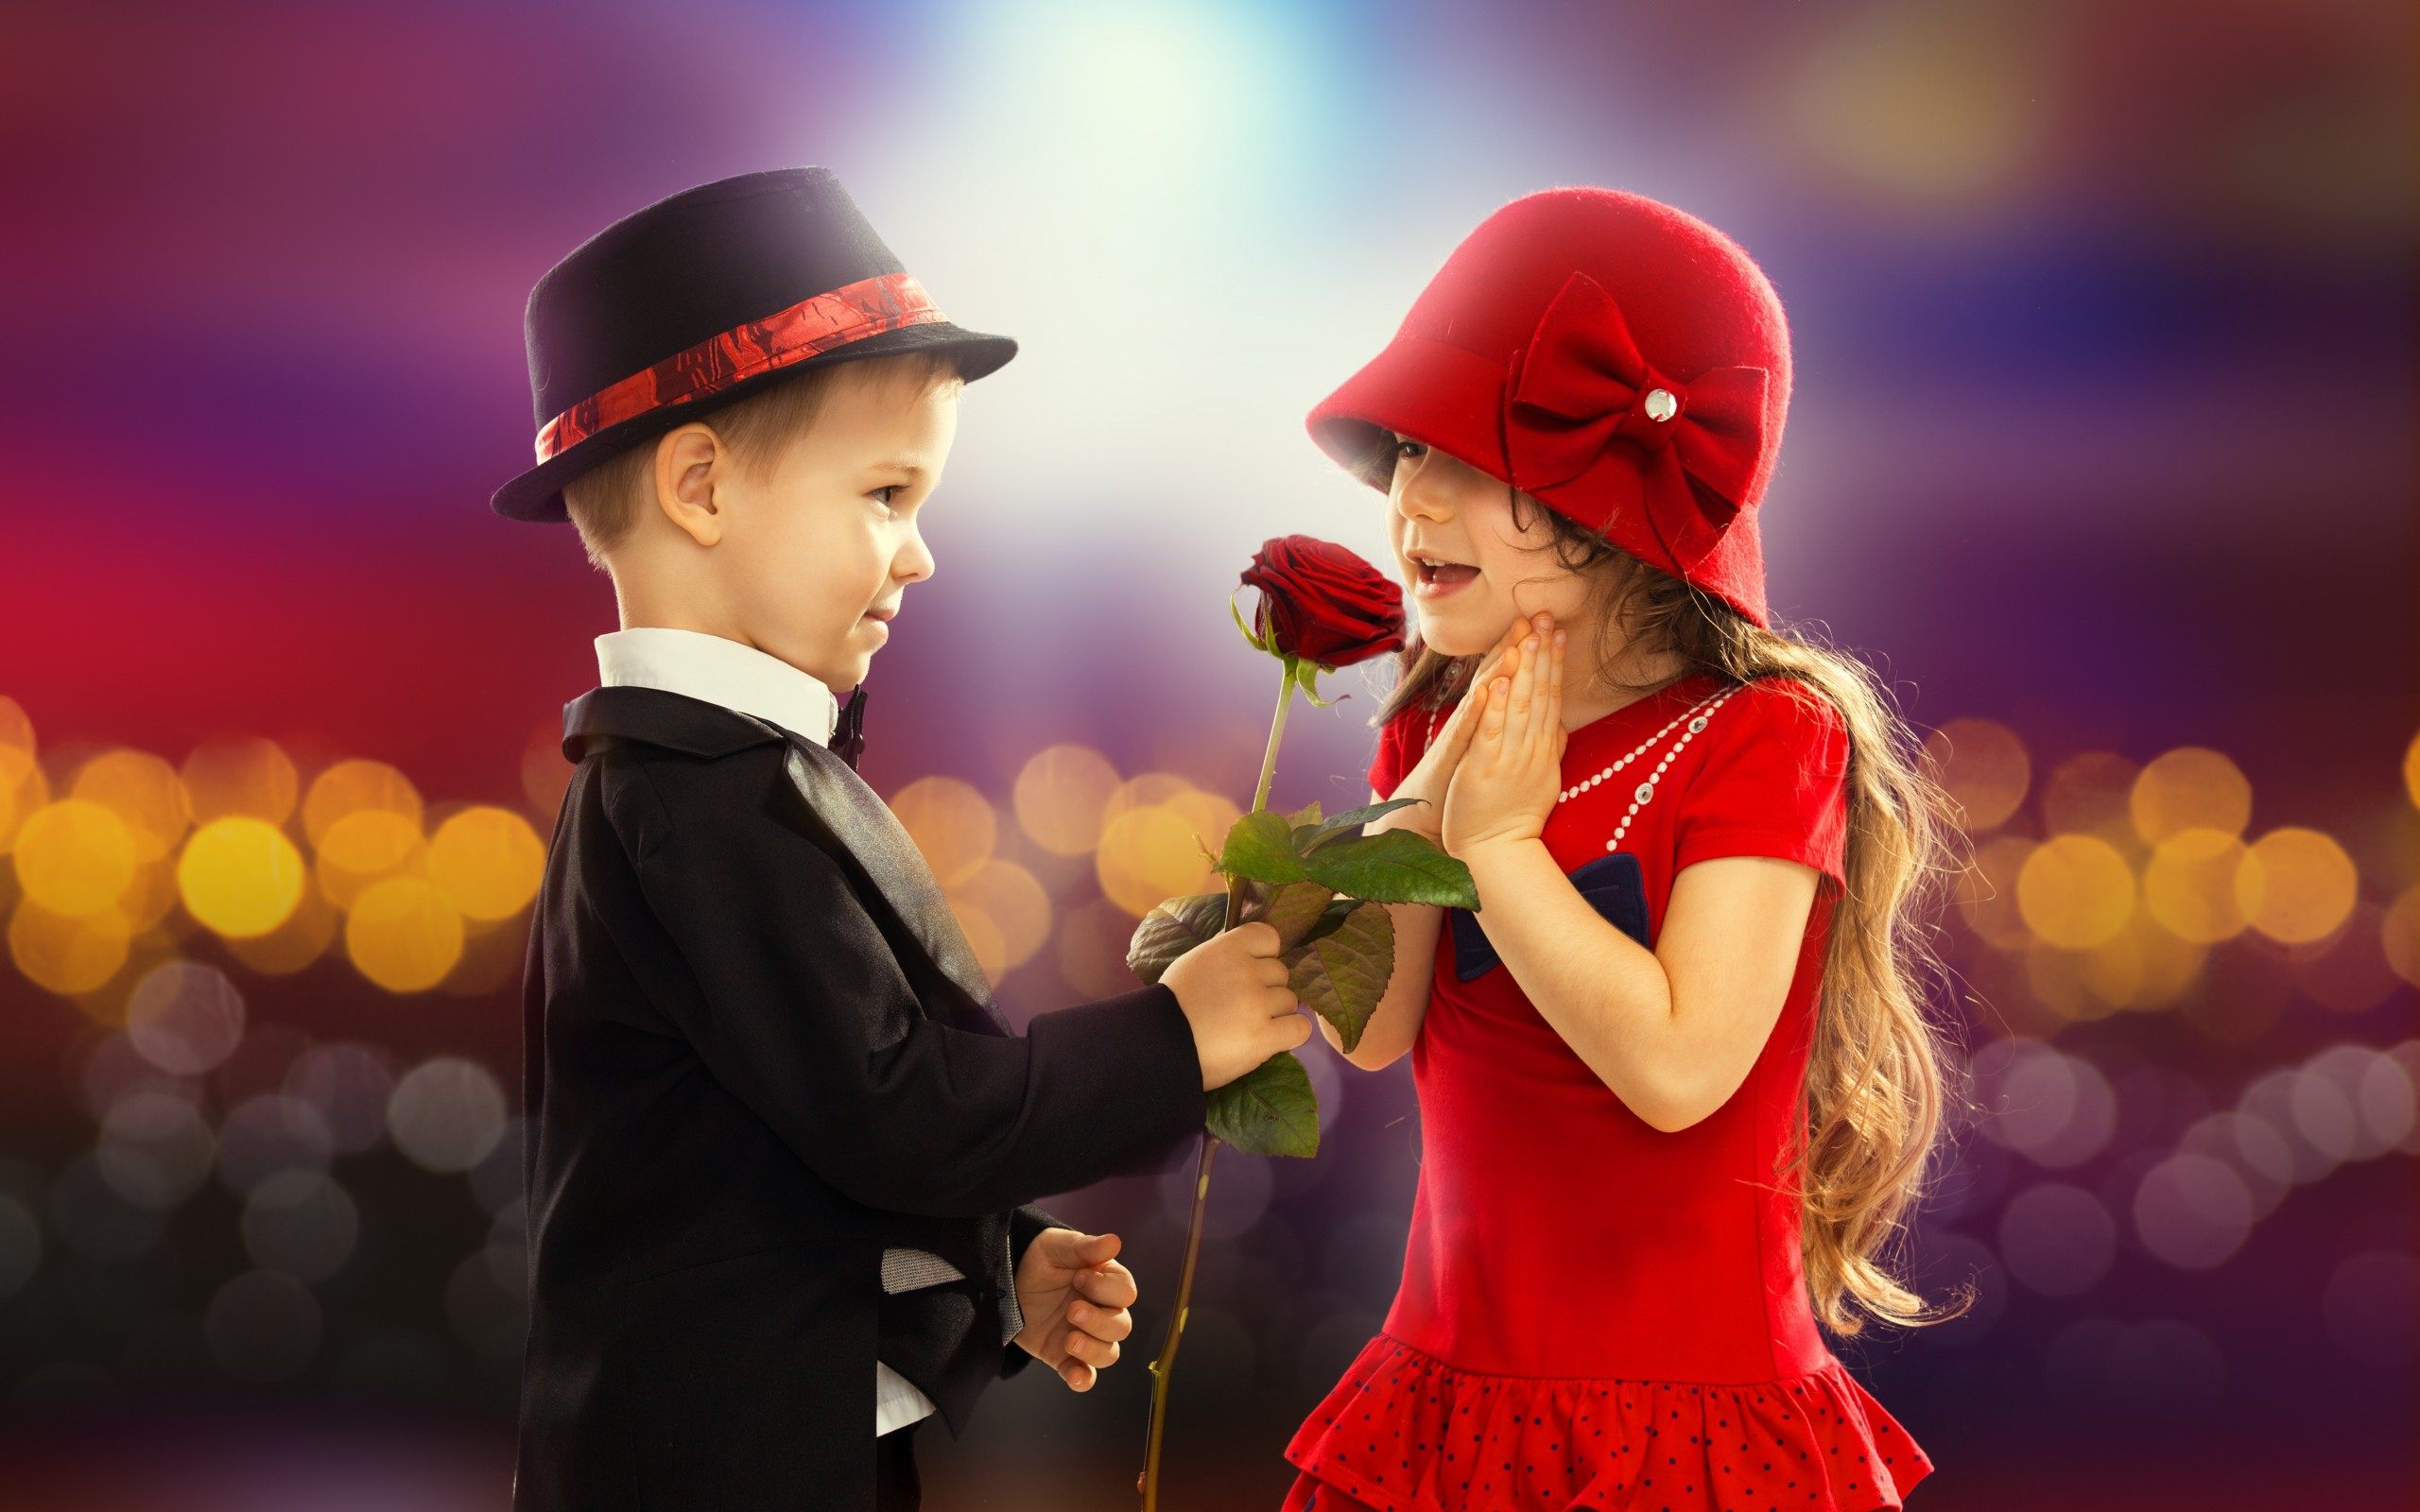 Cute Girl And Boy Wallpaper - Girl Proposing Boy With Rose , HD Wallpaper & Backgrounds